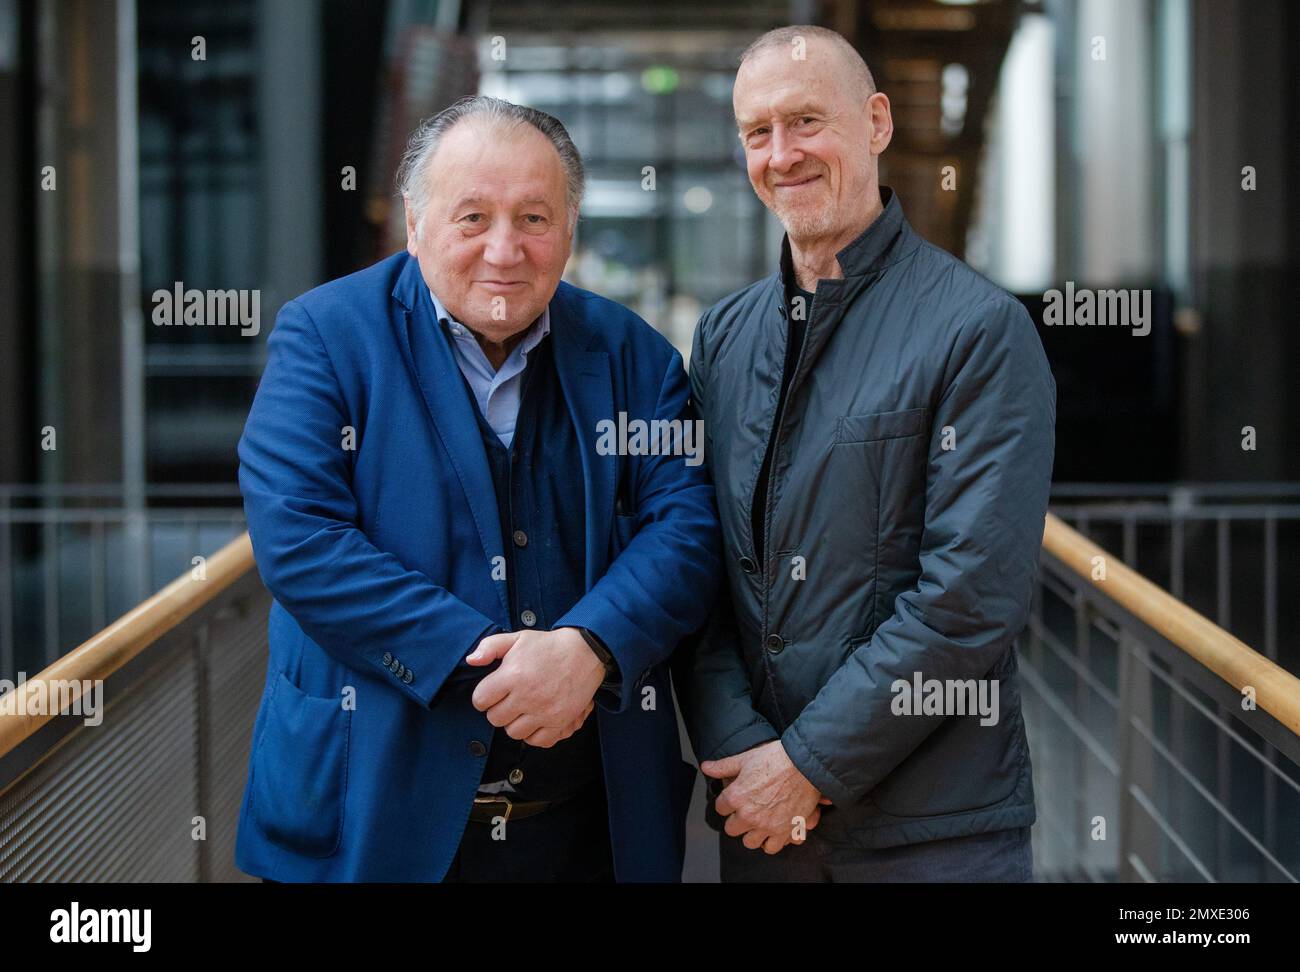 Karlsruhe, Germany. 03rd Feb, 2023. Choreographer William Forsythe (r) stands next to Peter Weibel (l), director of the Karlsruhe Center for Art and Media (ZKM). Forsythe has given his archive to the ZKM Media Art Center. The center will preserve and make accessible the artist's collection of audiovisual media and documents spanning some 50 years in the long term. Credit: Christoph Schmidt/dpa/Alamy Live News Stock Photo